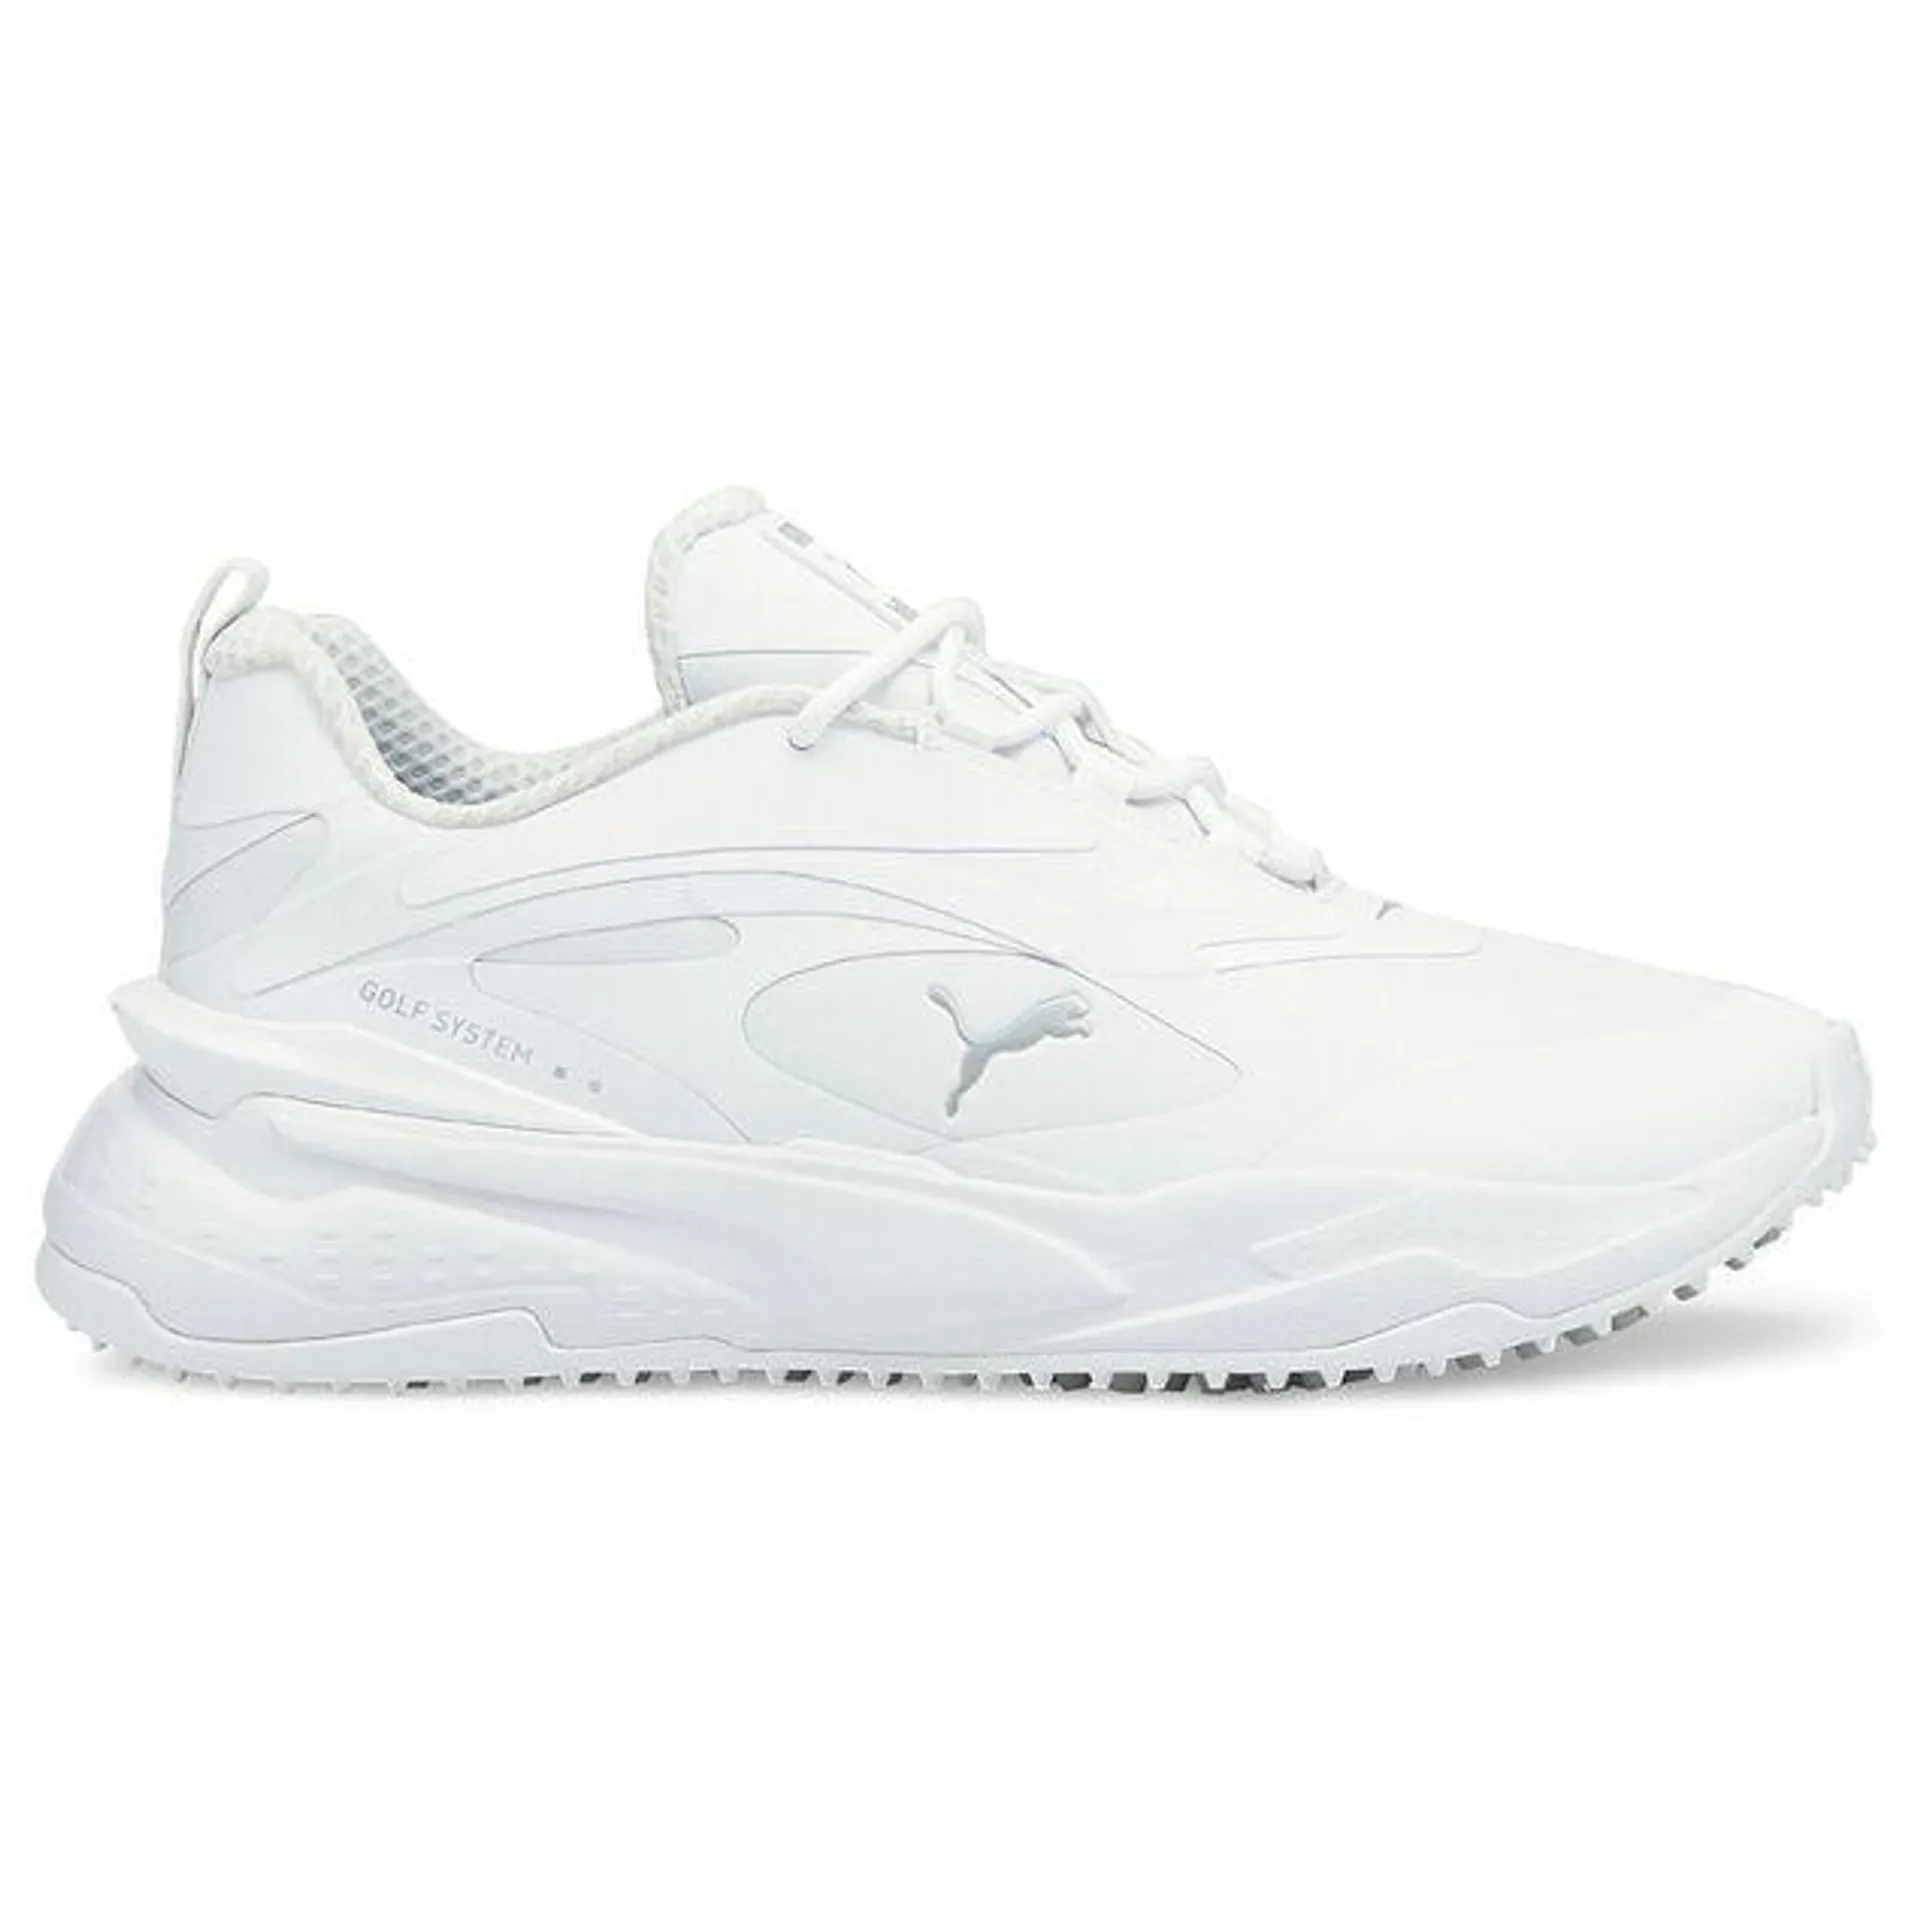 PUMA Ladies RS-Fast Waterproof Spikeless Golf Shoes